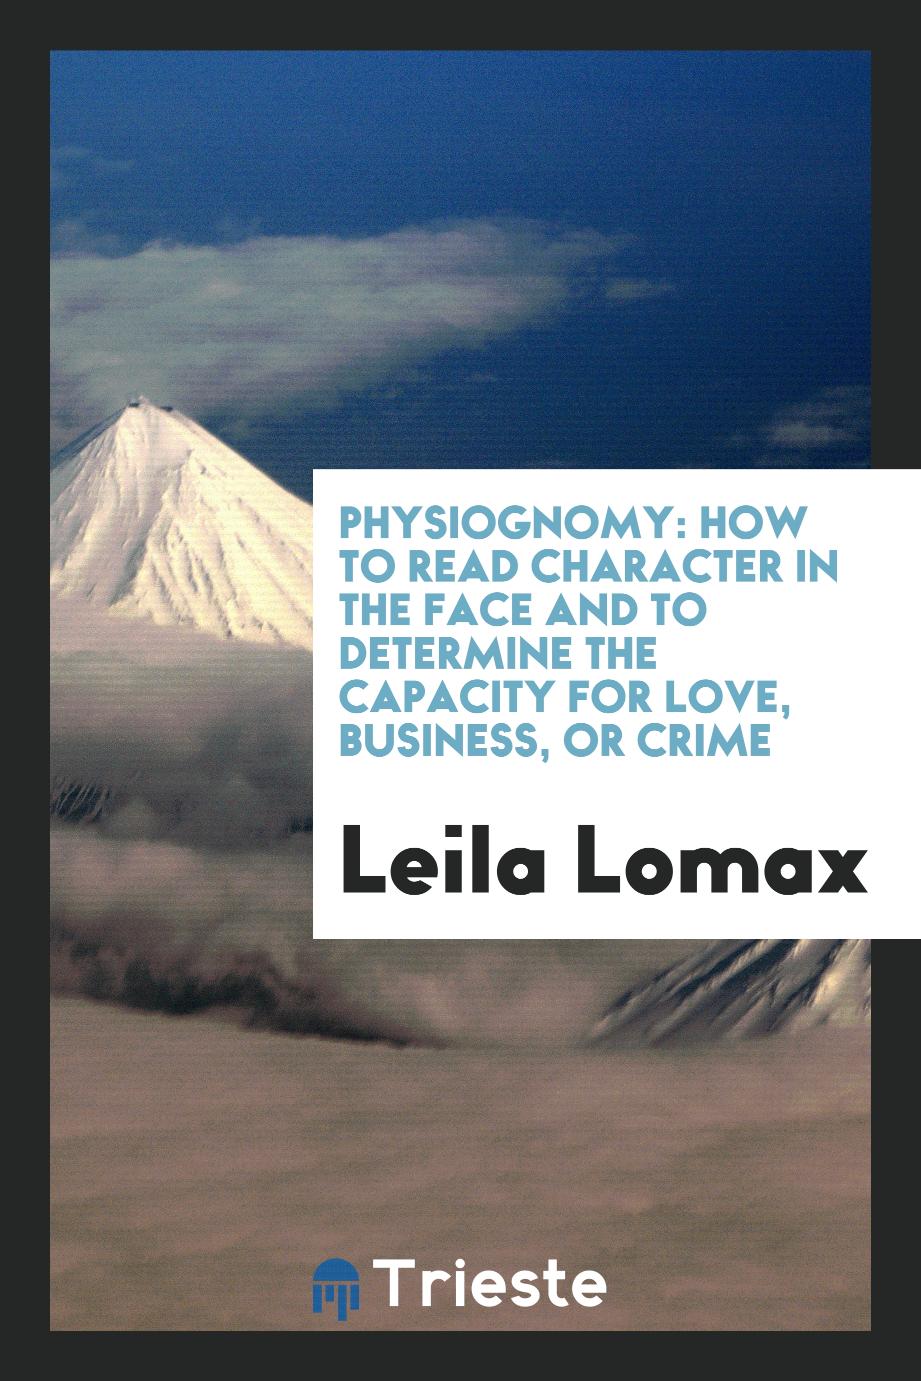 Leila Lomax - Physiognomy: How to Read Character in the Face and to Determine the Capacity for Love, Business, or Crime